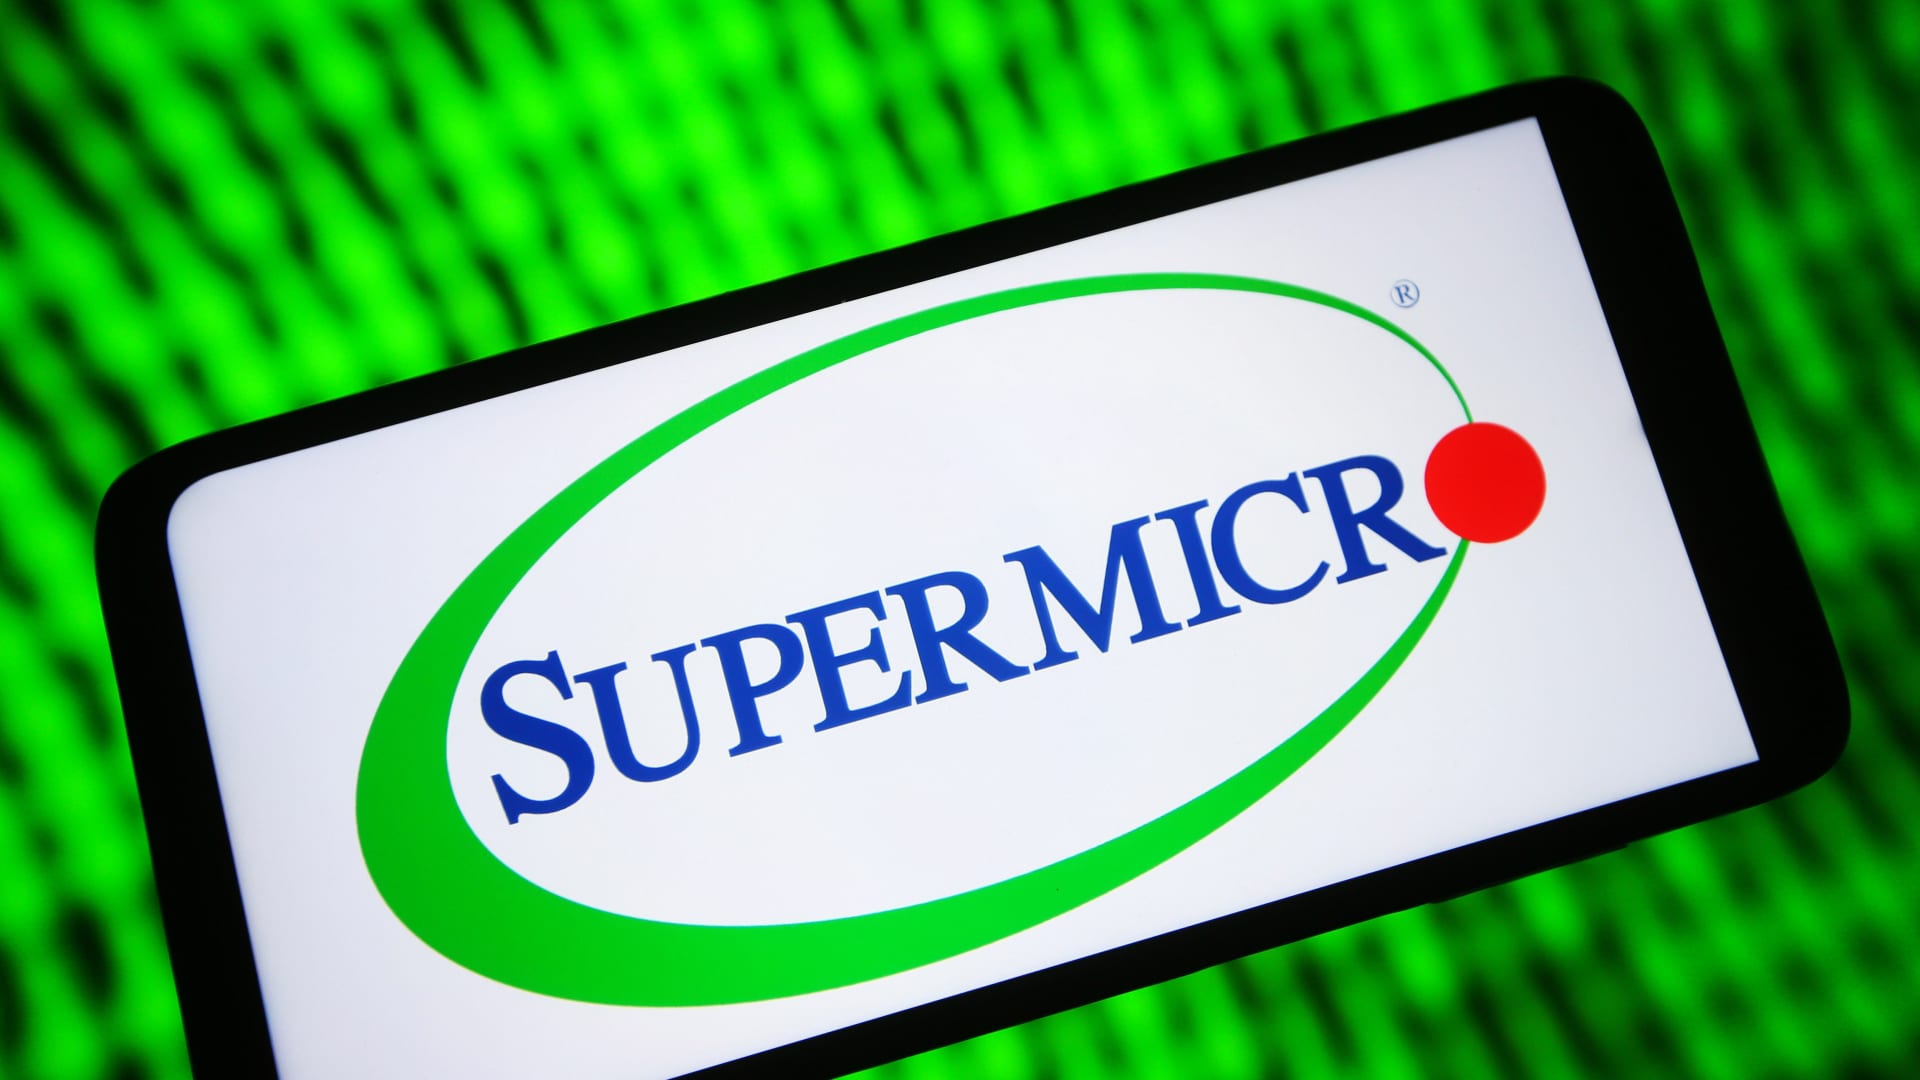 The Super Micro Computer logo is seen on a smartphone screen.